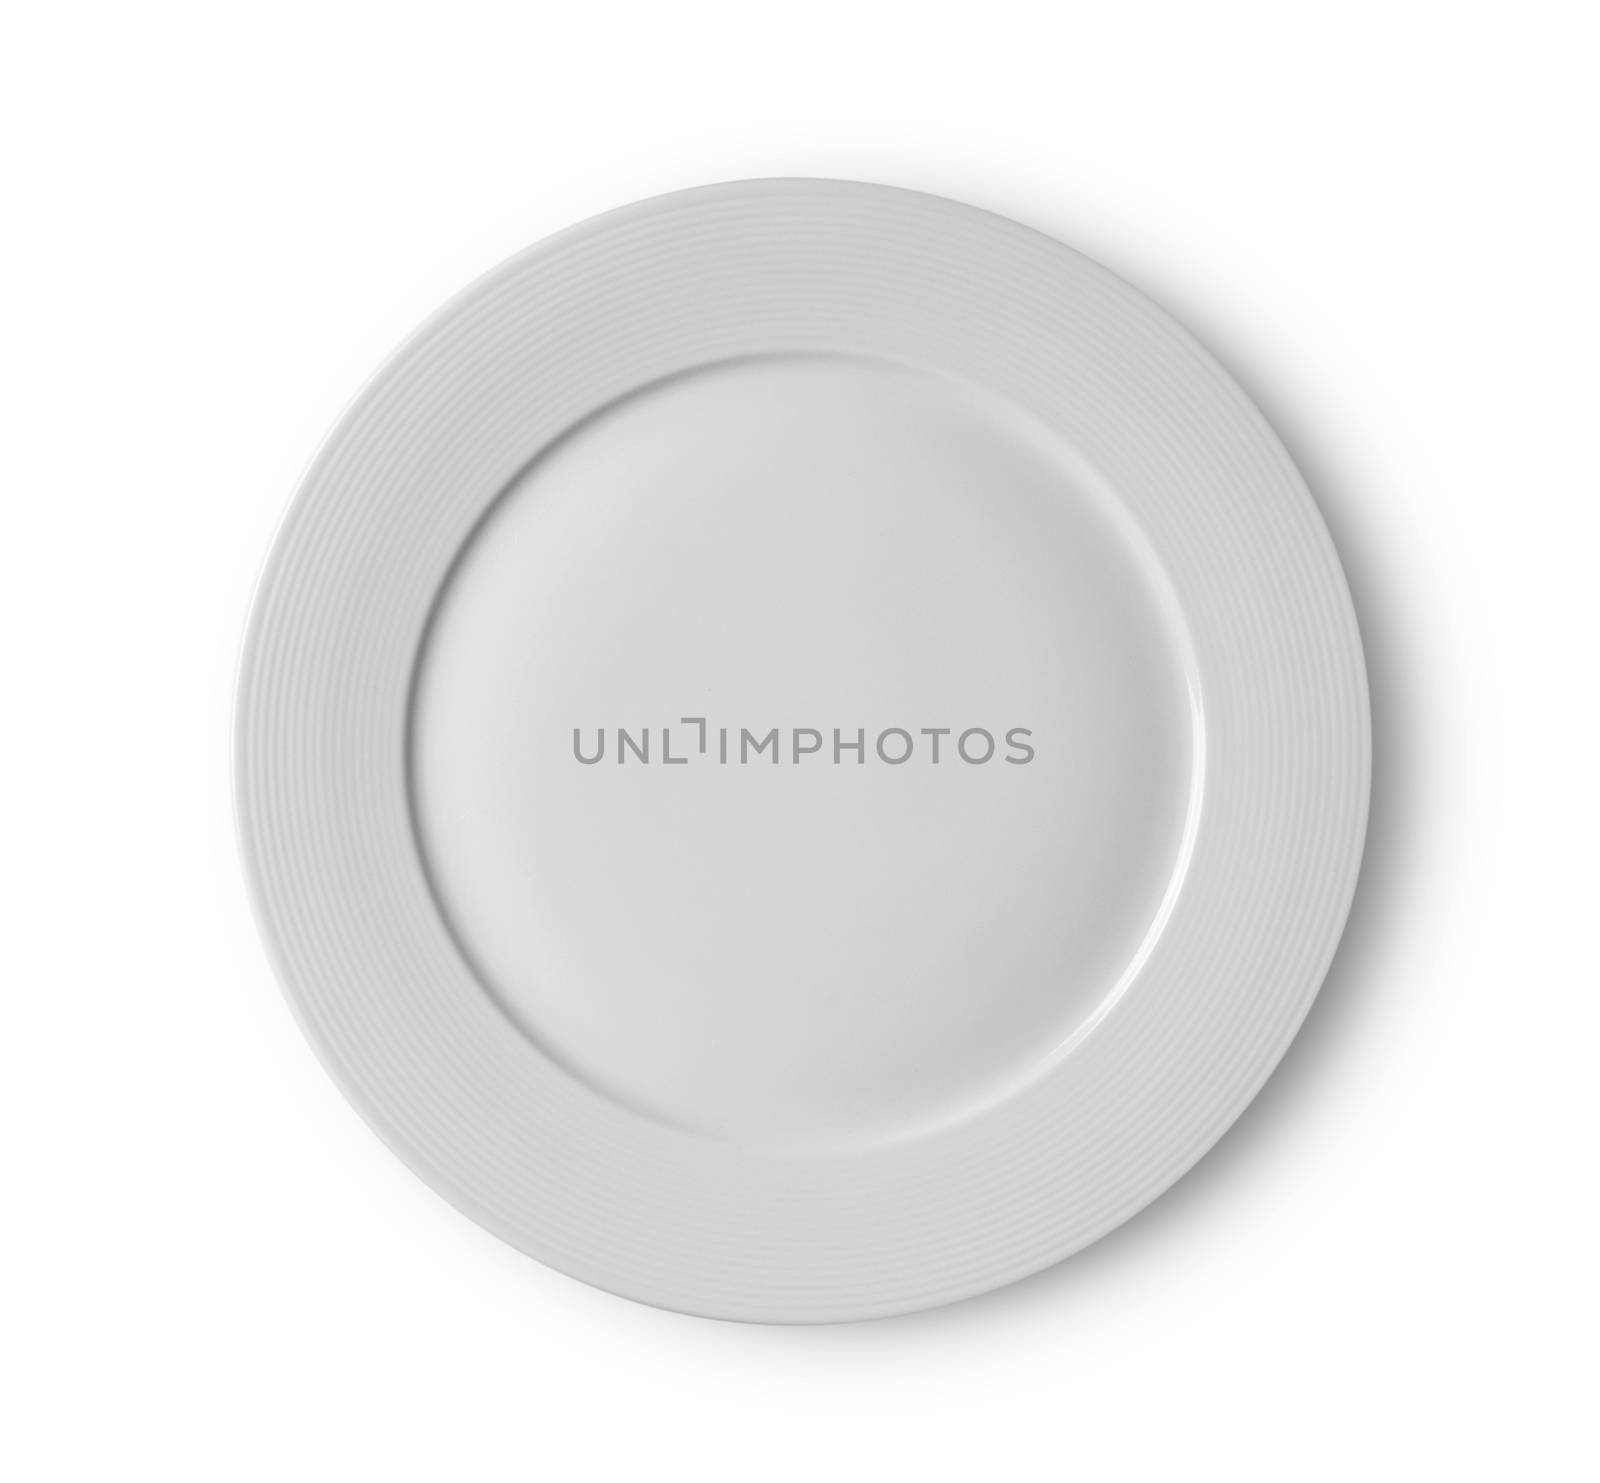 white plate on white background by sommai